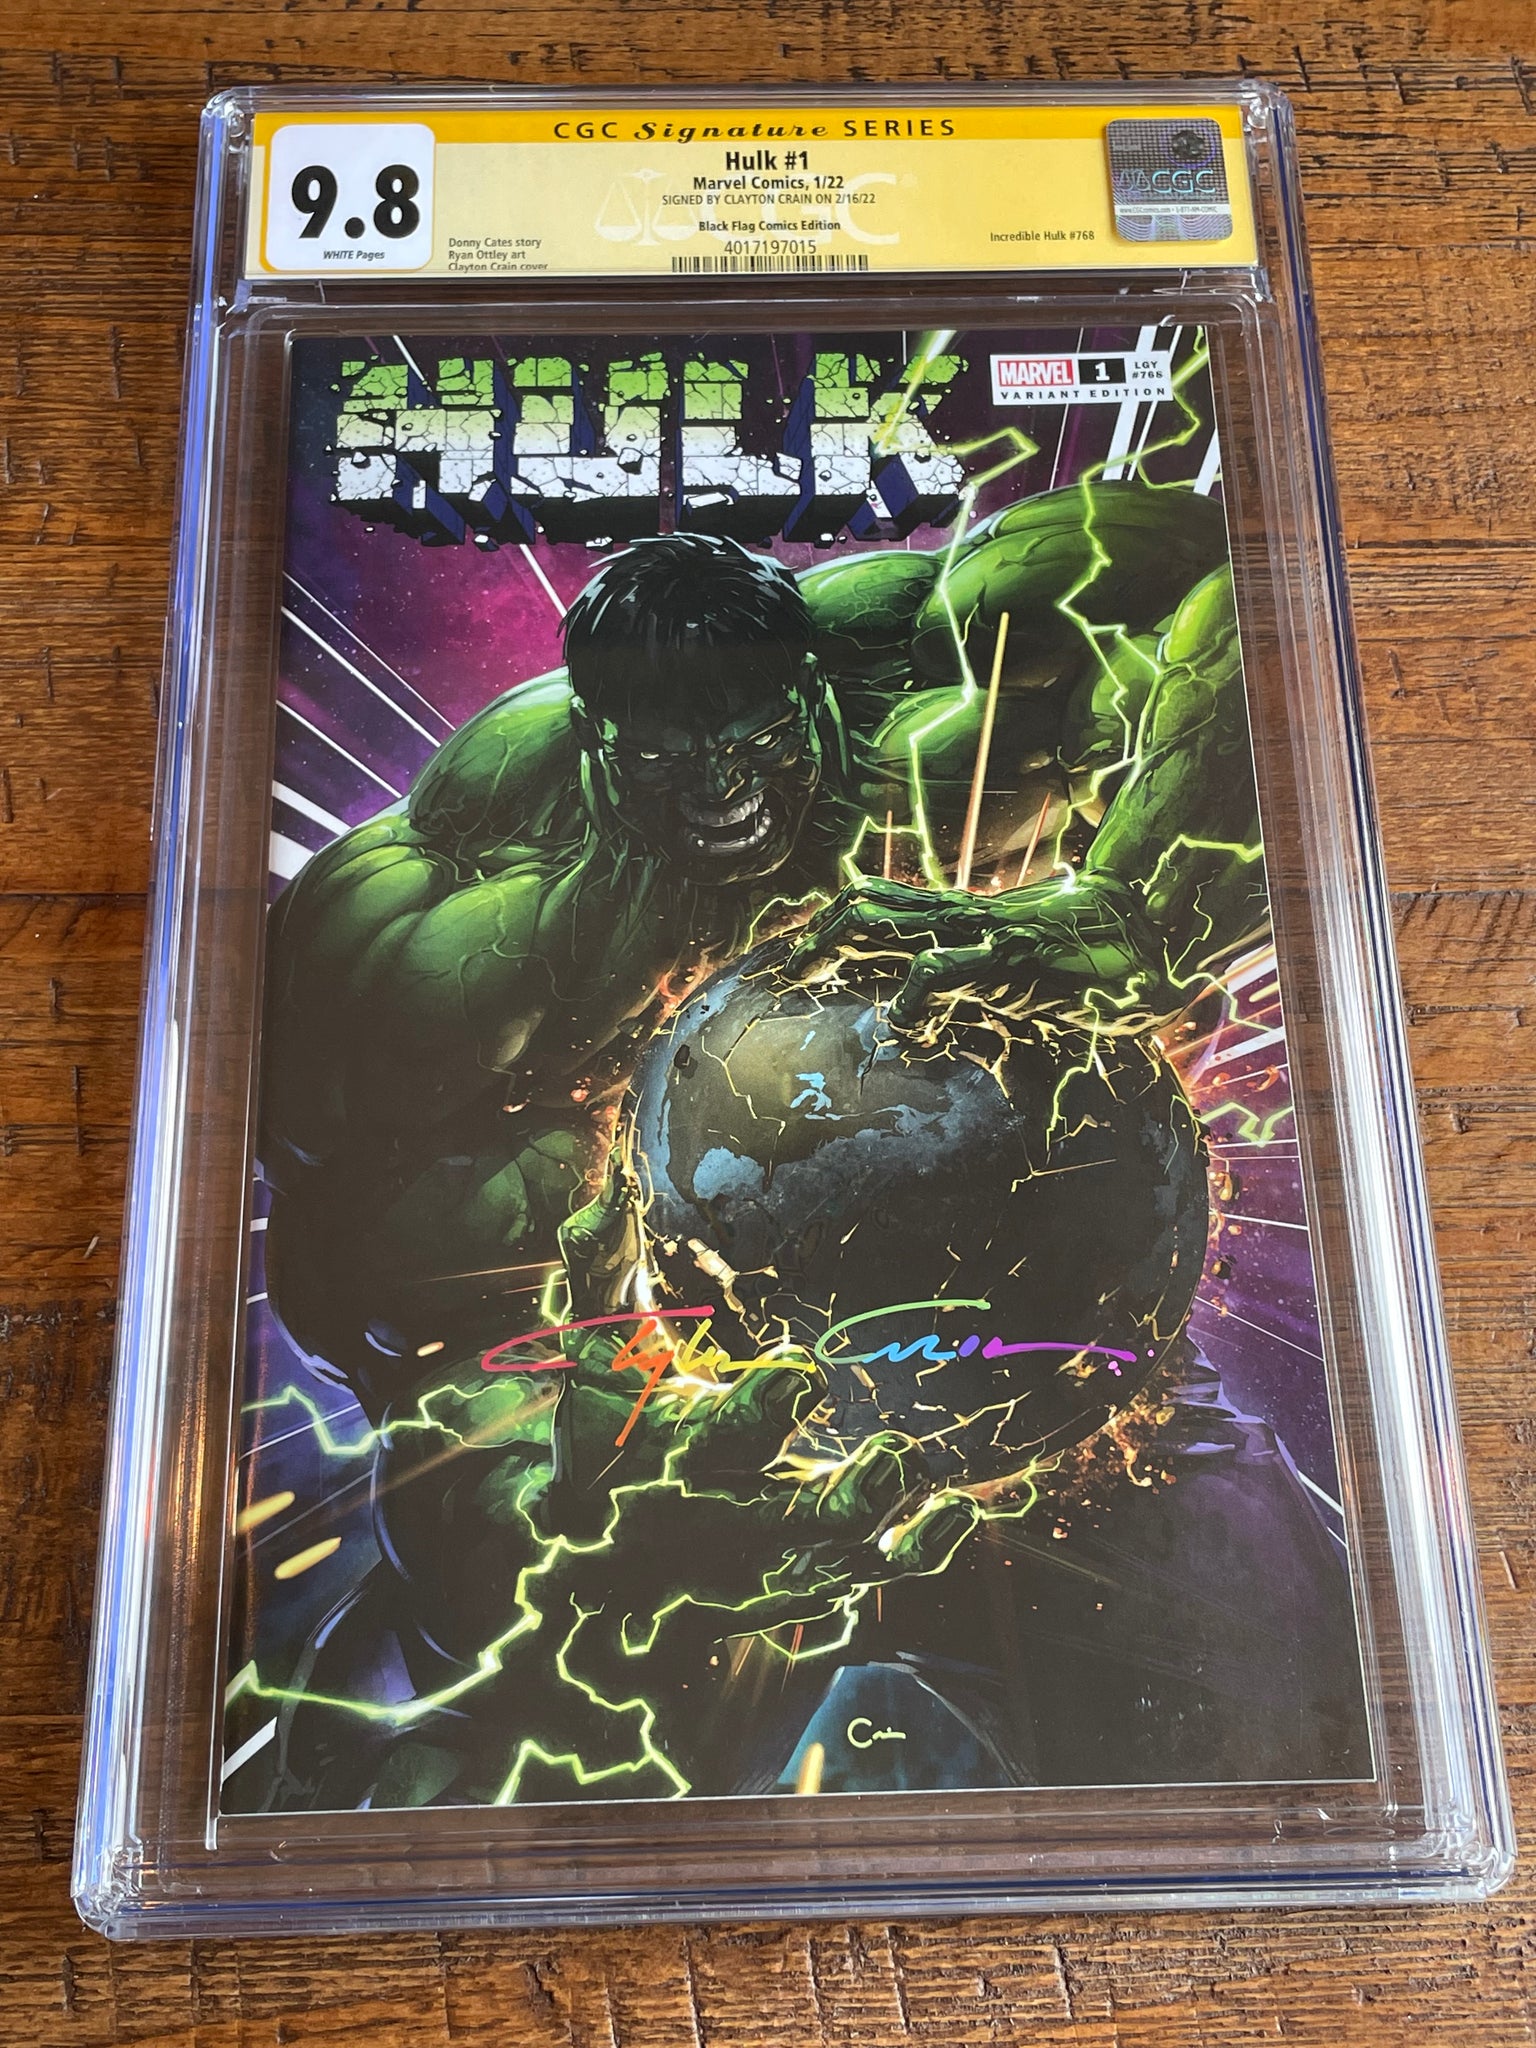 HULK #1 CGC SS 9.8 CLAYTON CRAIN INFINITY SIGNED 2021 TRADE DRESS VARIANT-A DONNY CATES